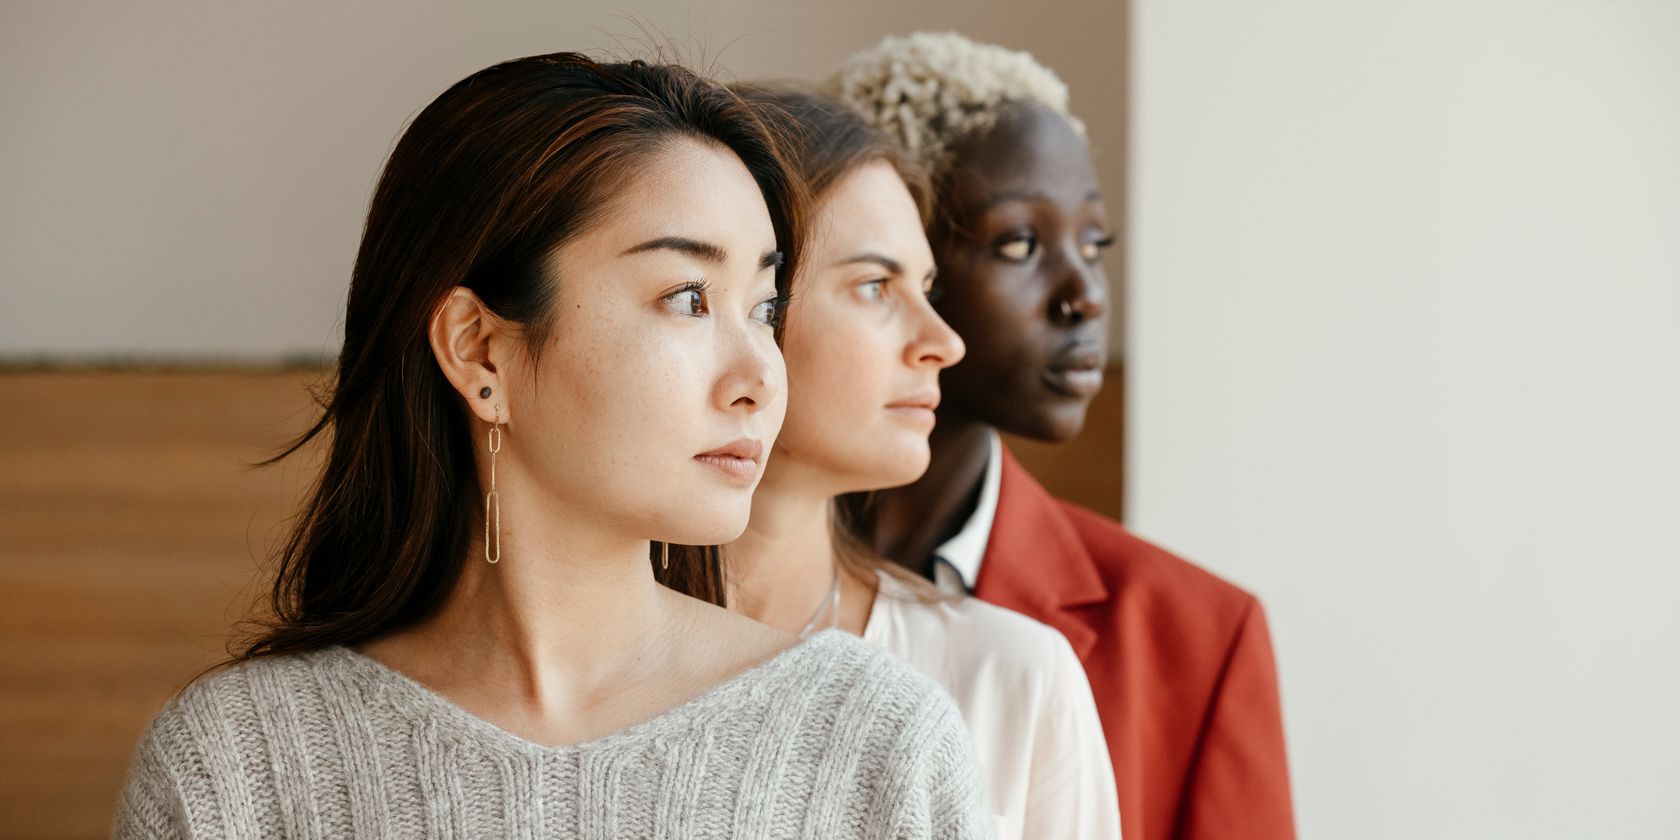 Profile picture showing three women of differing ethnicity